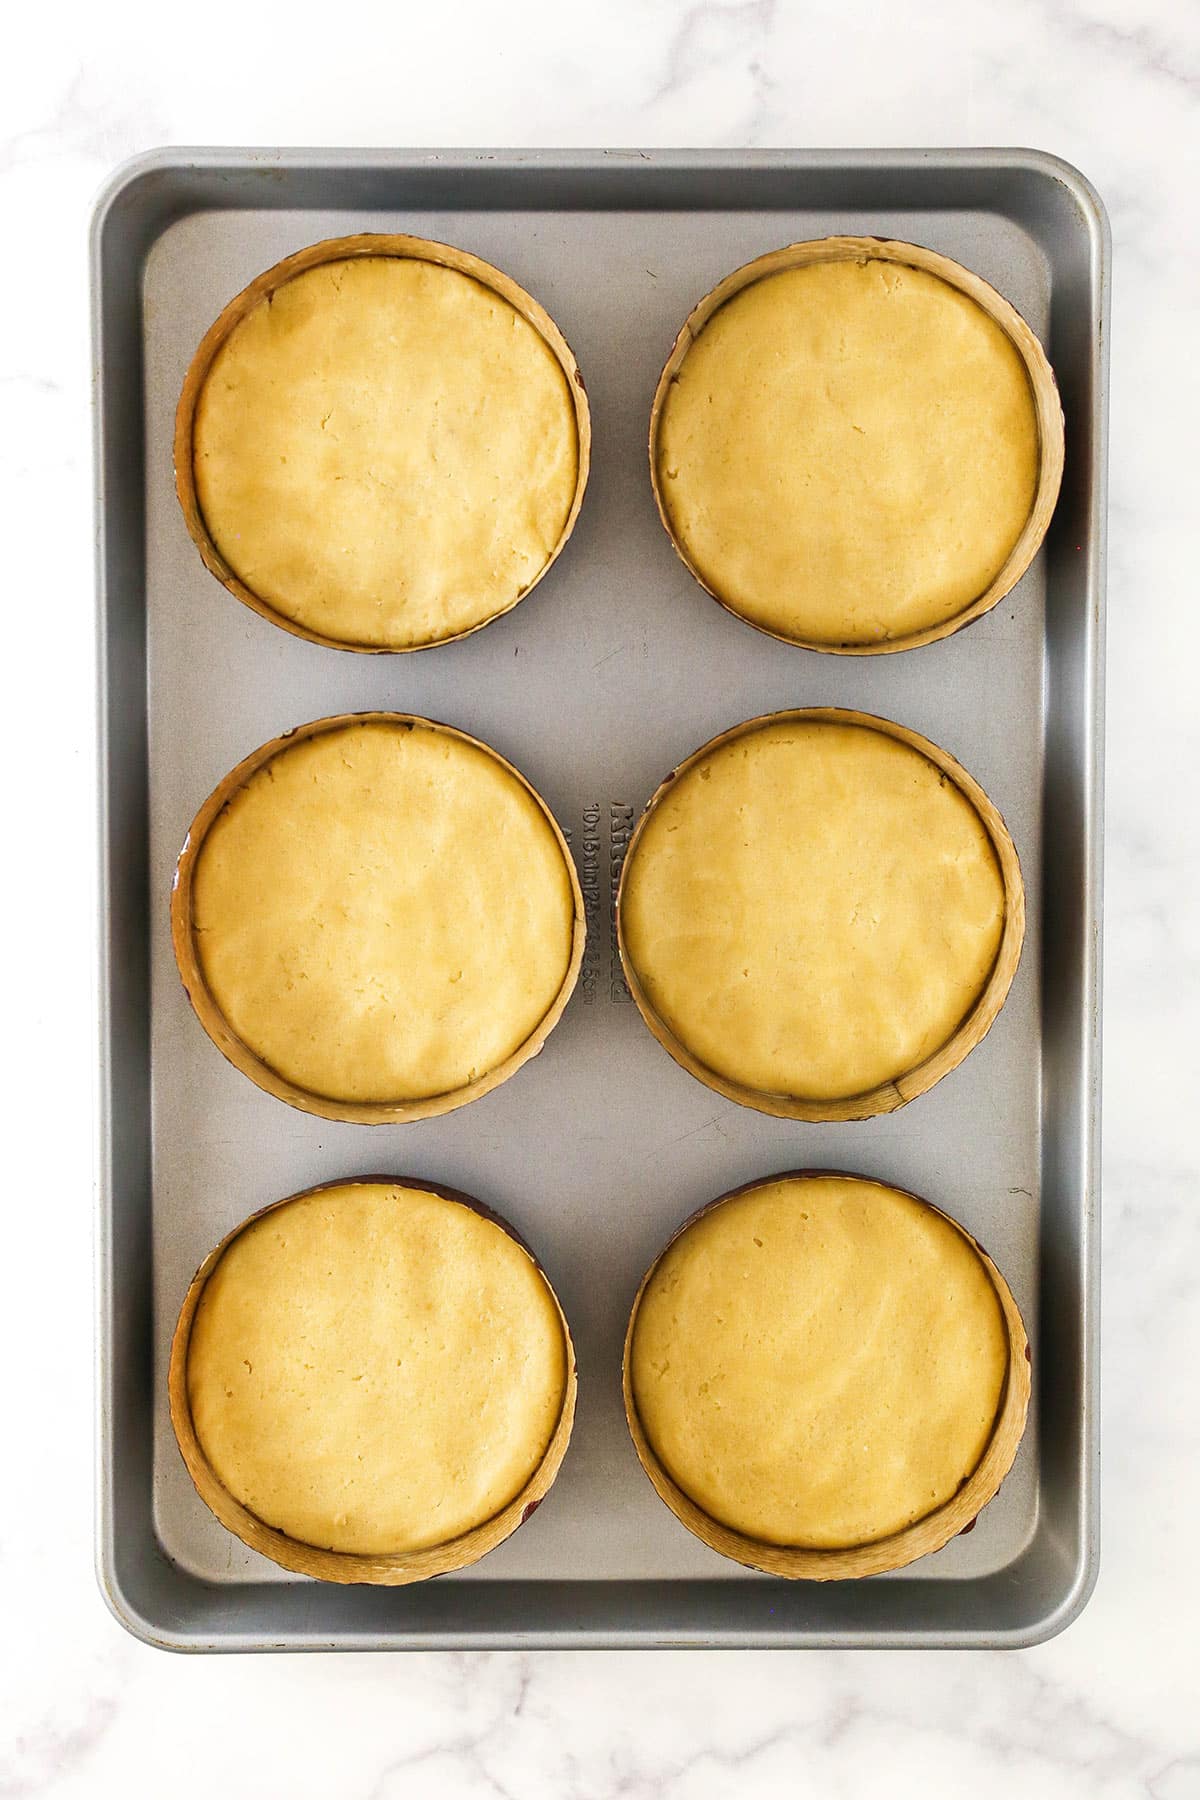 Sugar cookie dough pressed into six paper pie pans on a silver baking sheet